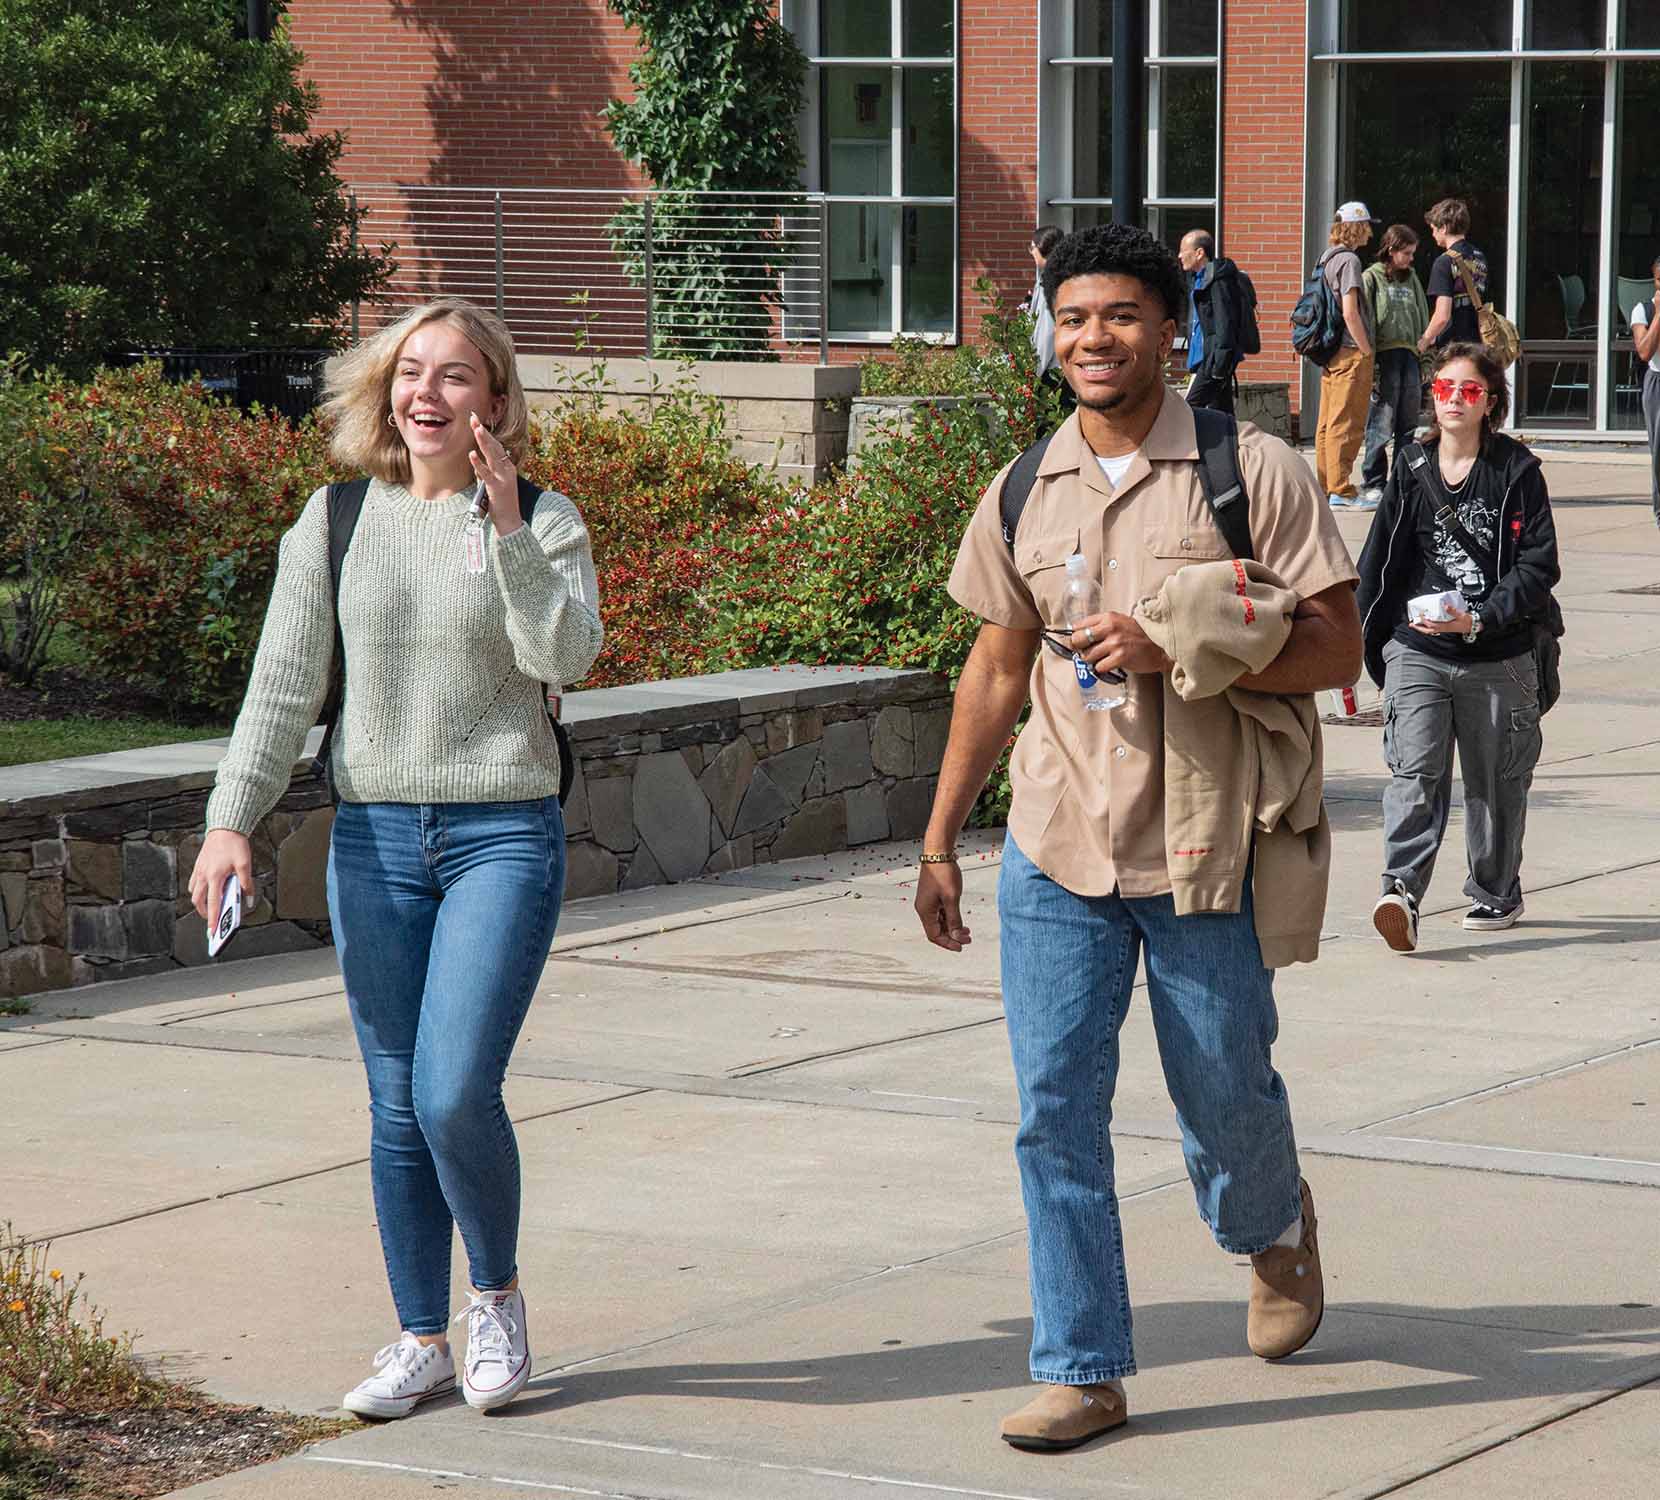 A male and female student smiling and walking together on the URI campus.